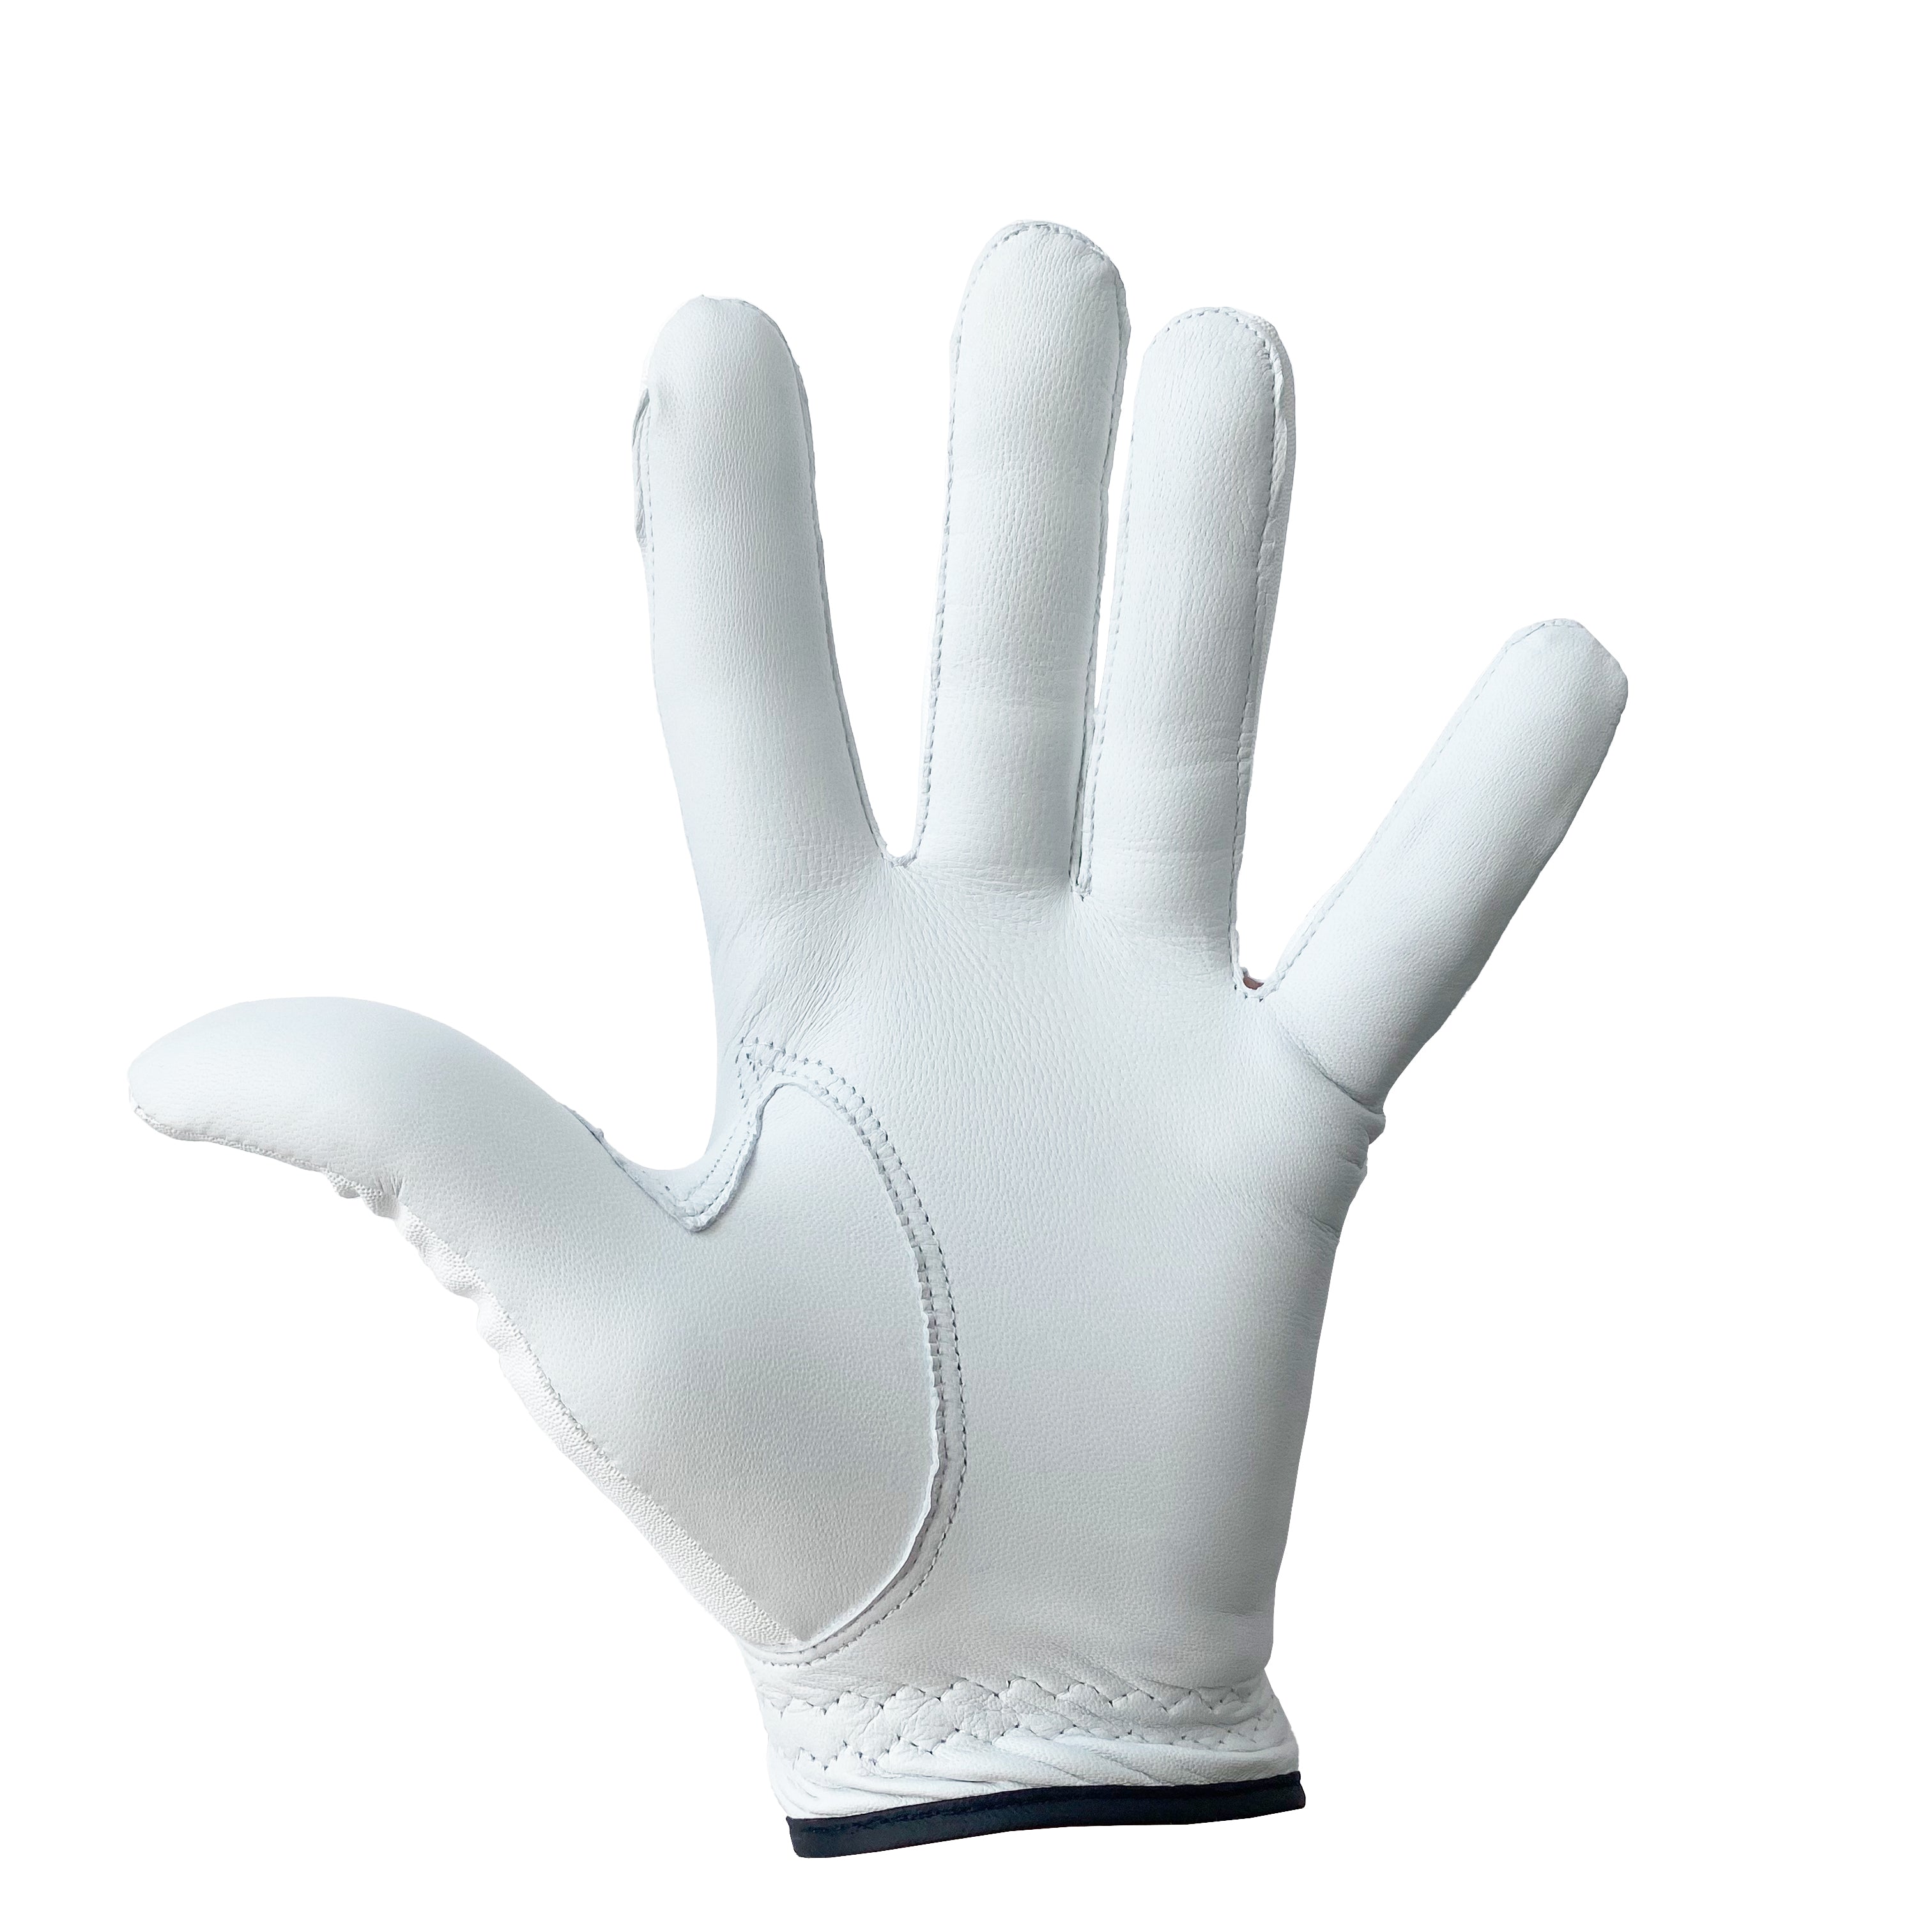 All-Weather Gloves